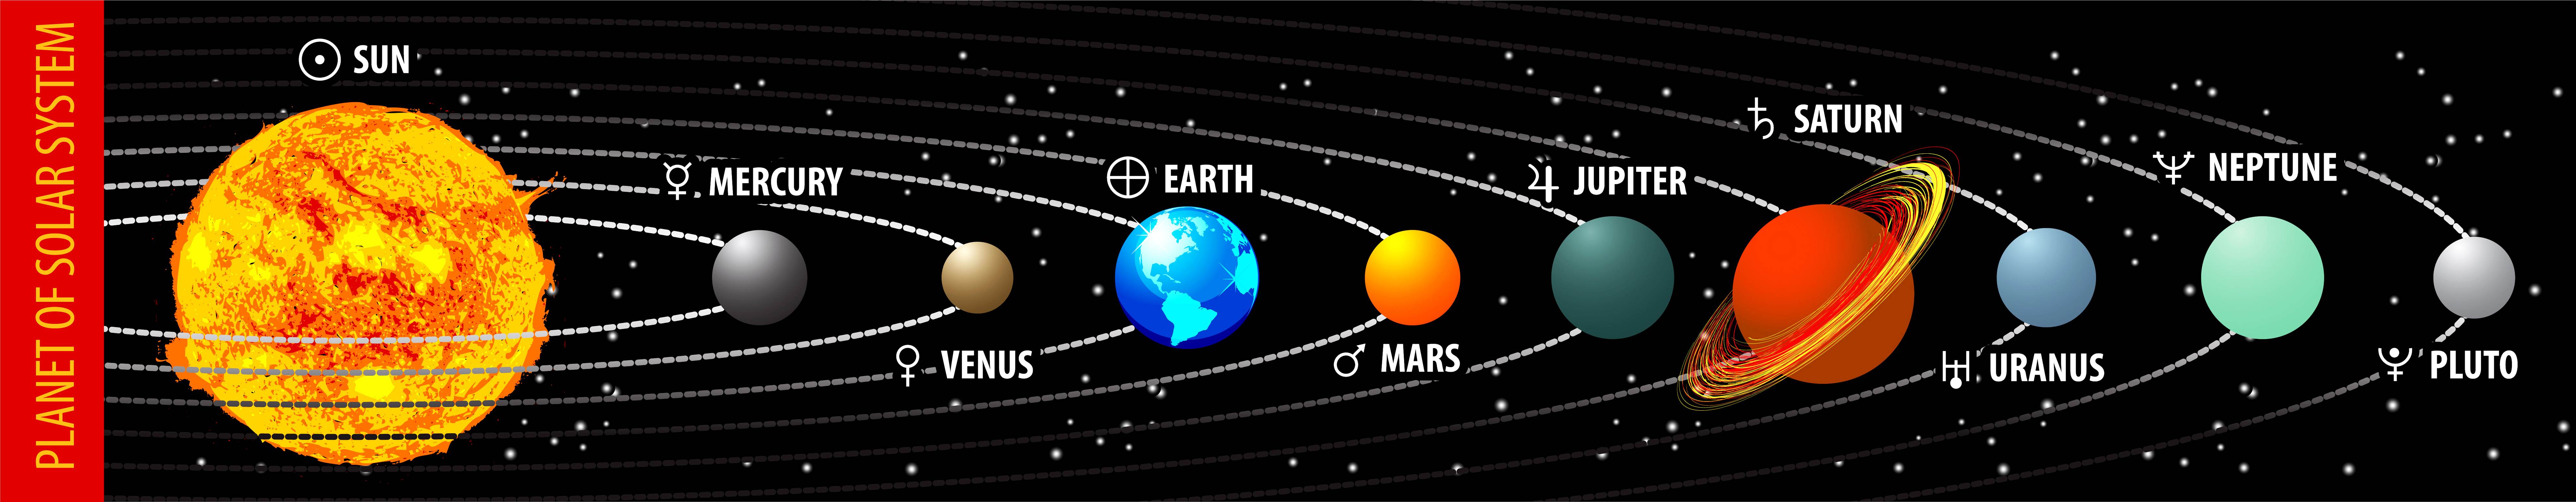 Planets closest to the sun to farthest